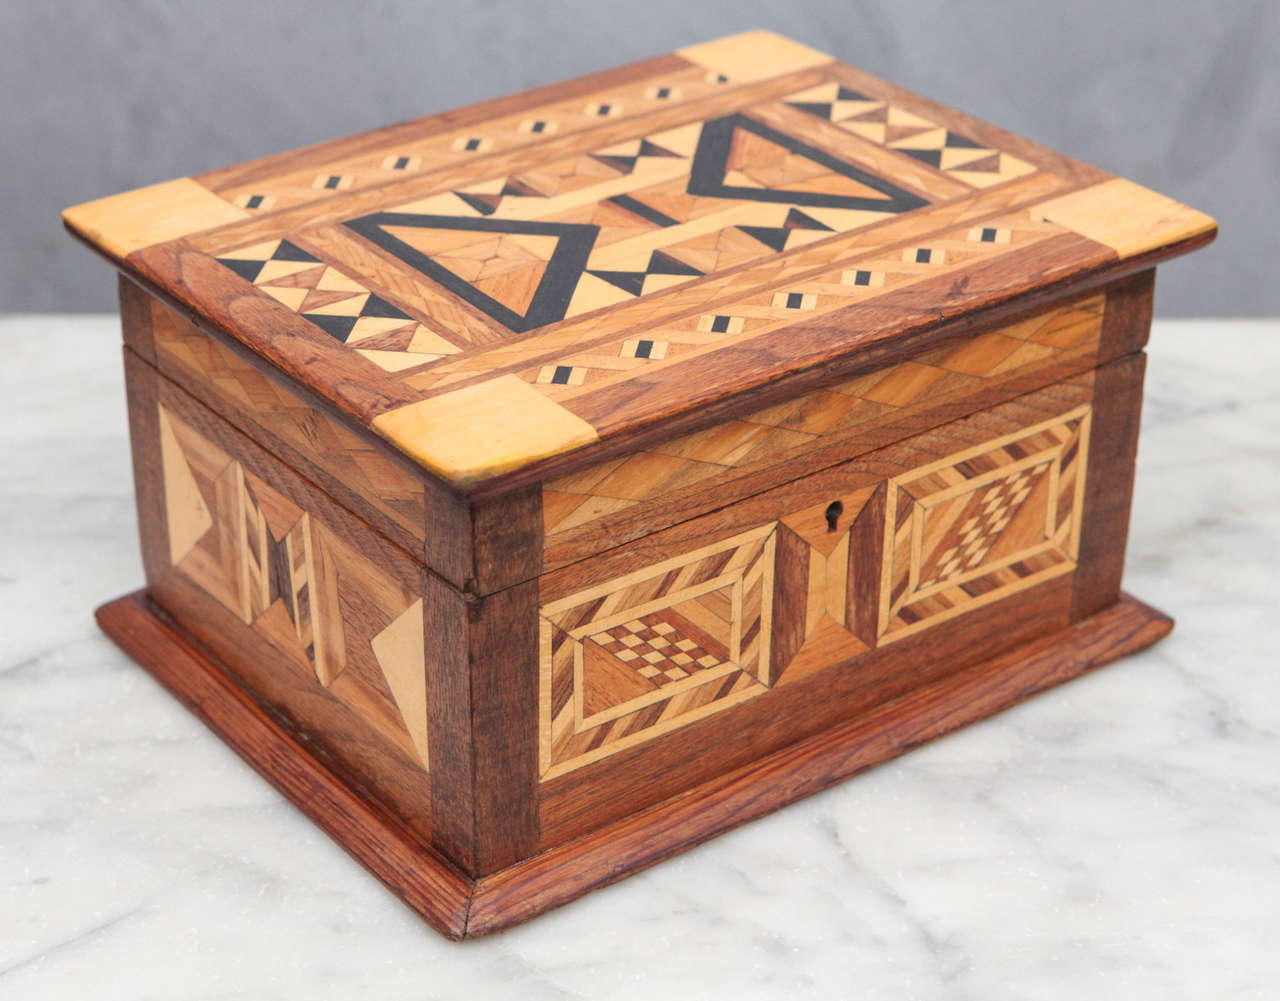 This is a great folk art box with light and dark woods in geometric patterns throughout. The interior has been recently restored with Japanese Rice Paper and retains the original blue velvet lining in the tray.